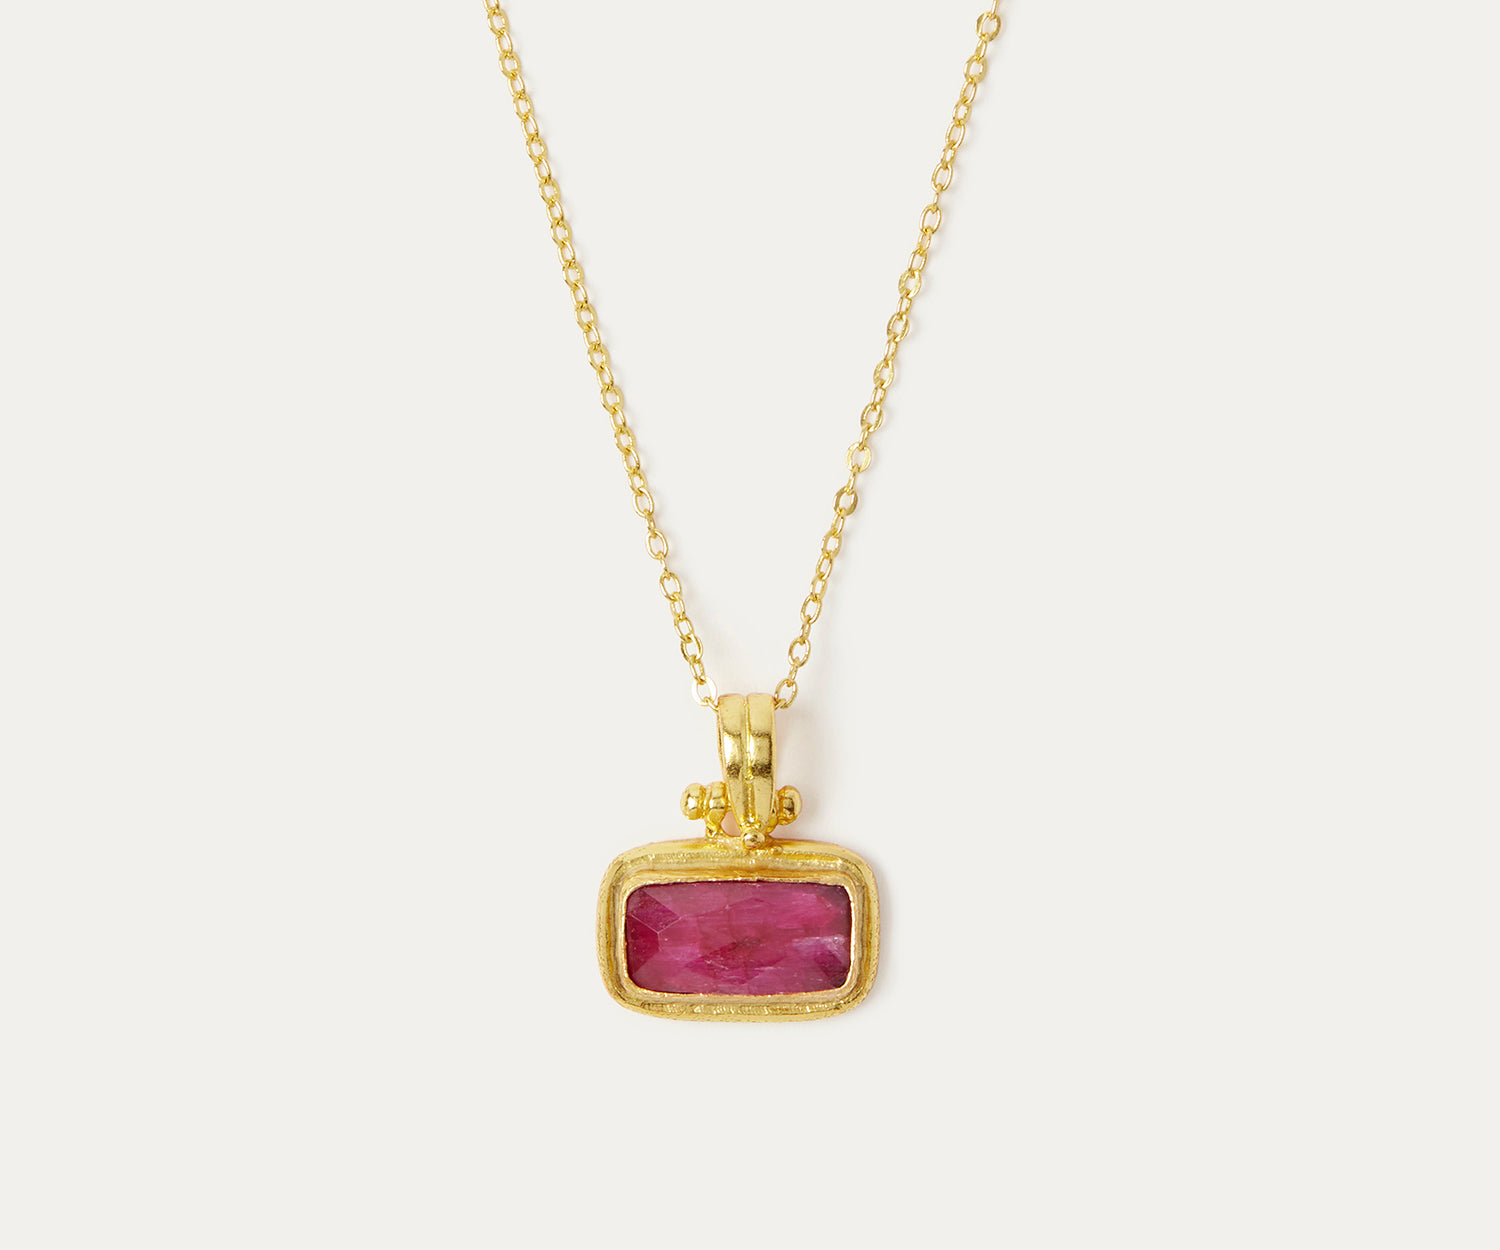 Noa Ruby Pendant Necklace | Sustainable Jewellery by Ottoman Hands